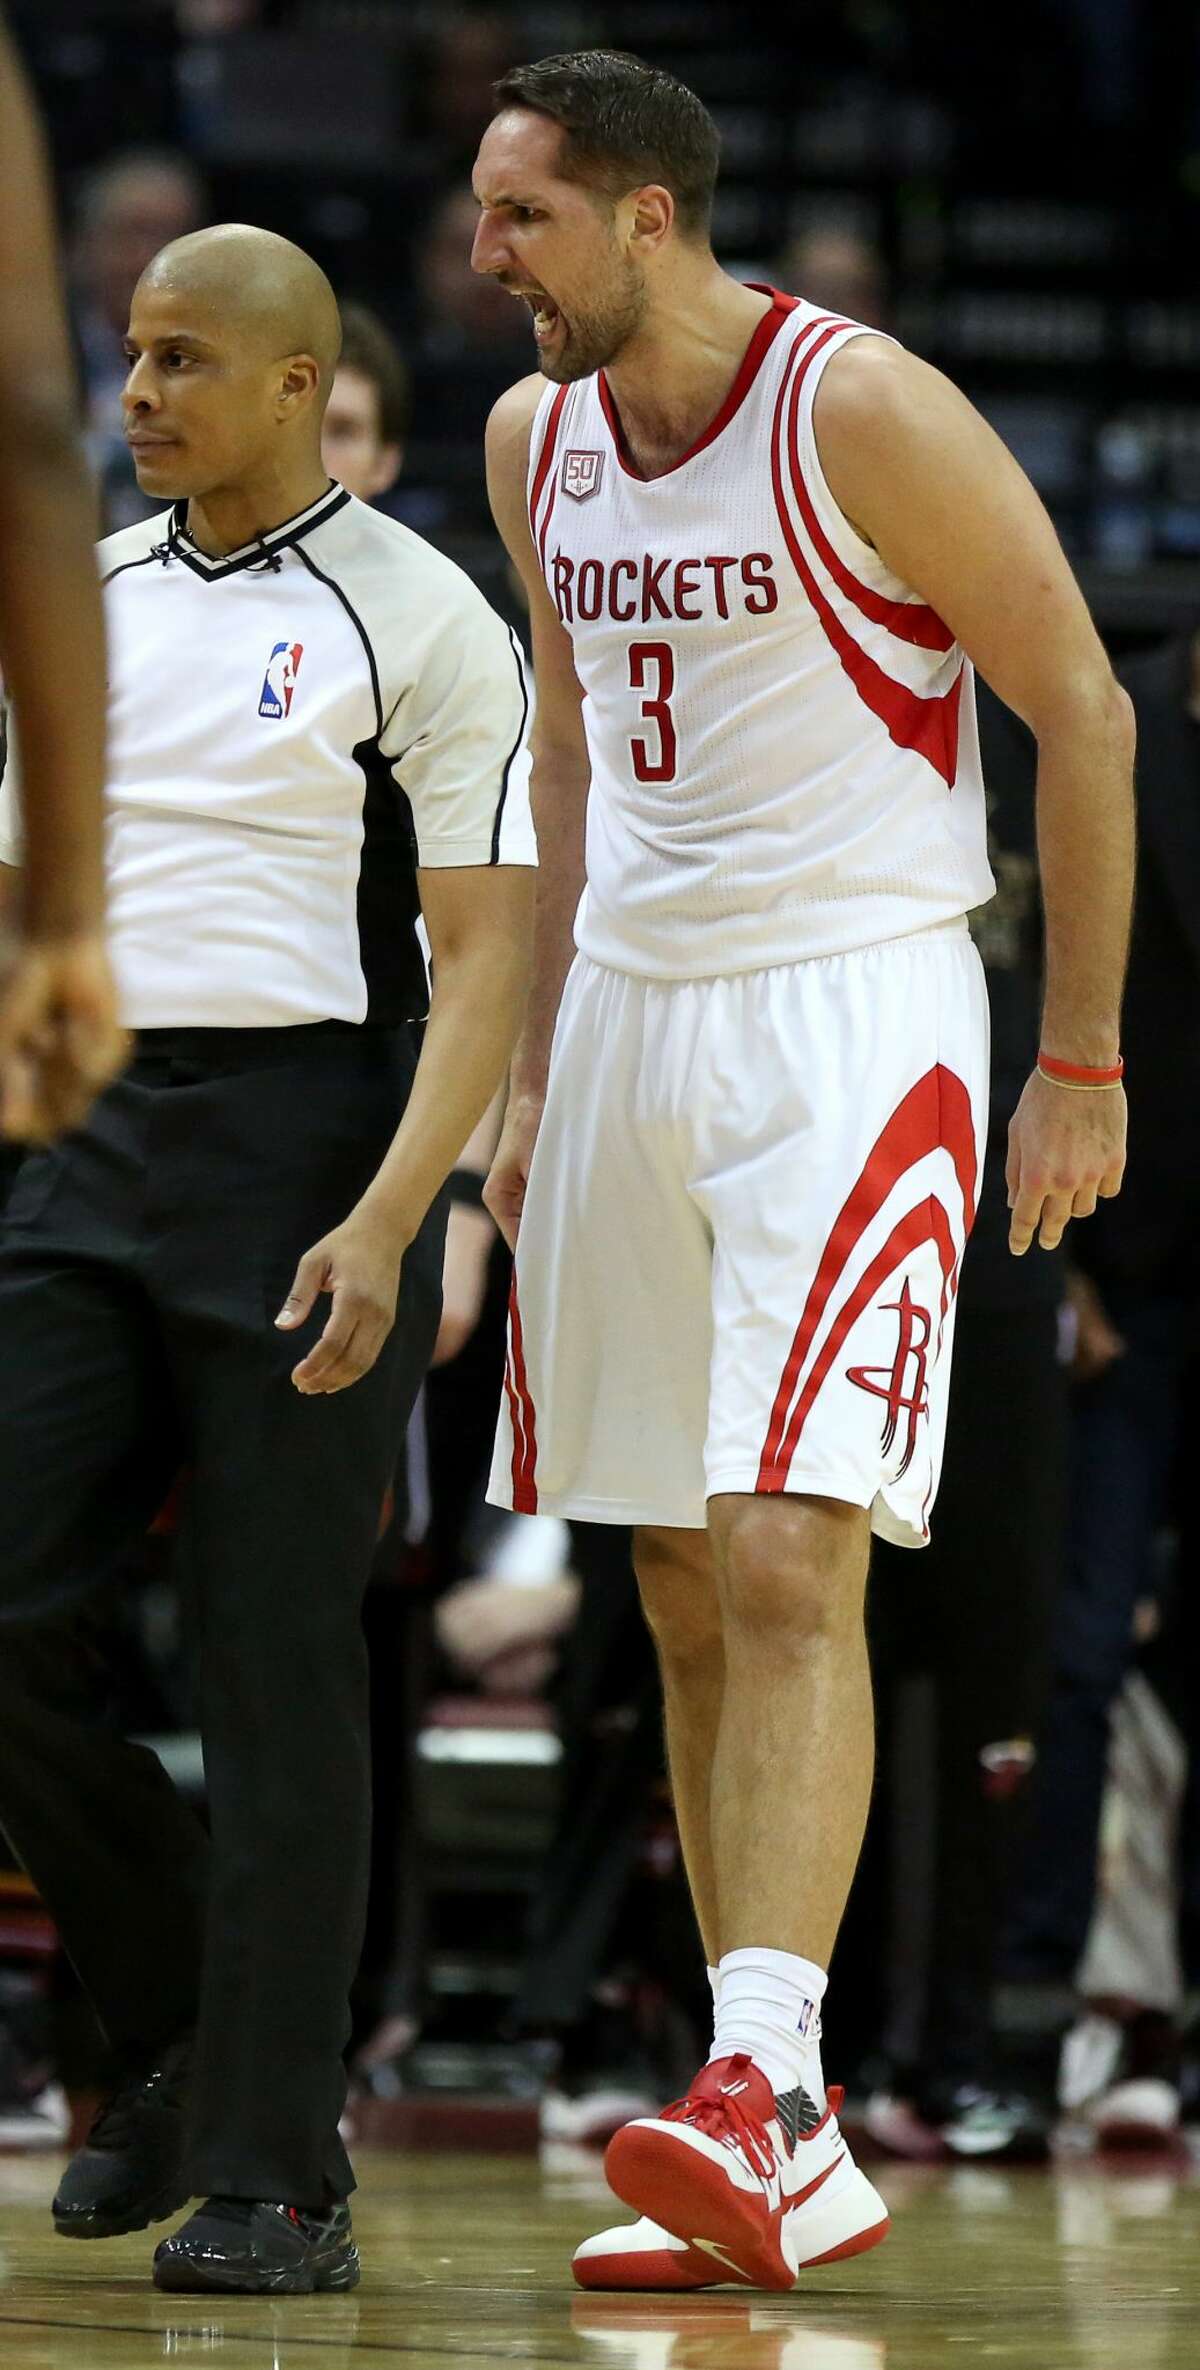 Houston Rockets forward Ryan Anderson (3) makes complain to the referee after being called a technical foul during the second half of the game Wednesday, Feb. 15, 2017, in Houston. ( Yi-Chin Lee / Houston Chronicle )